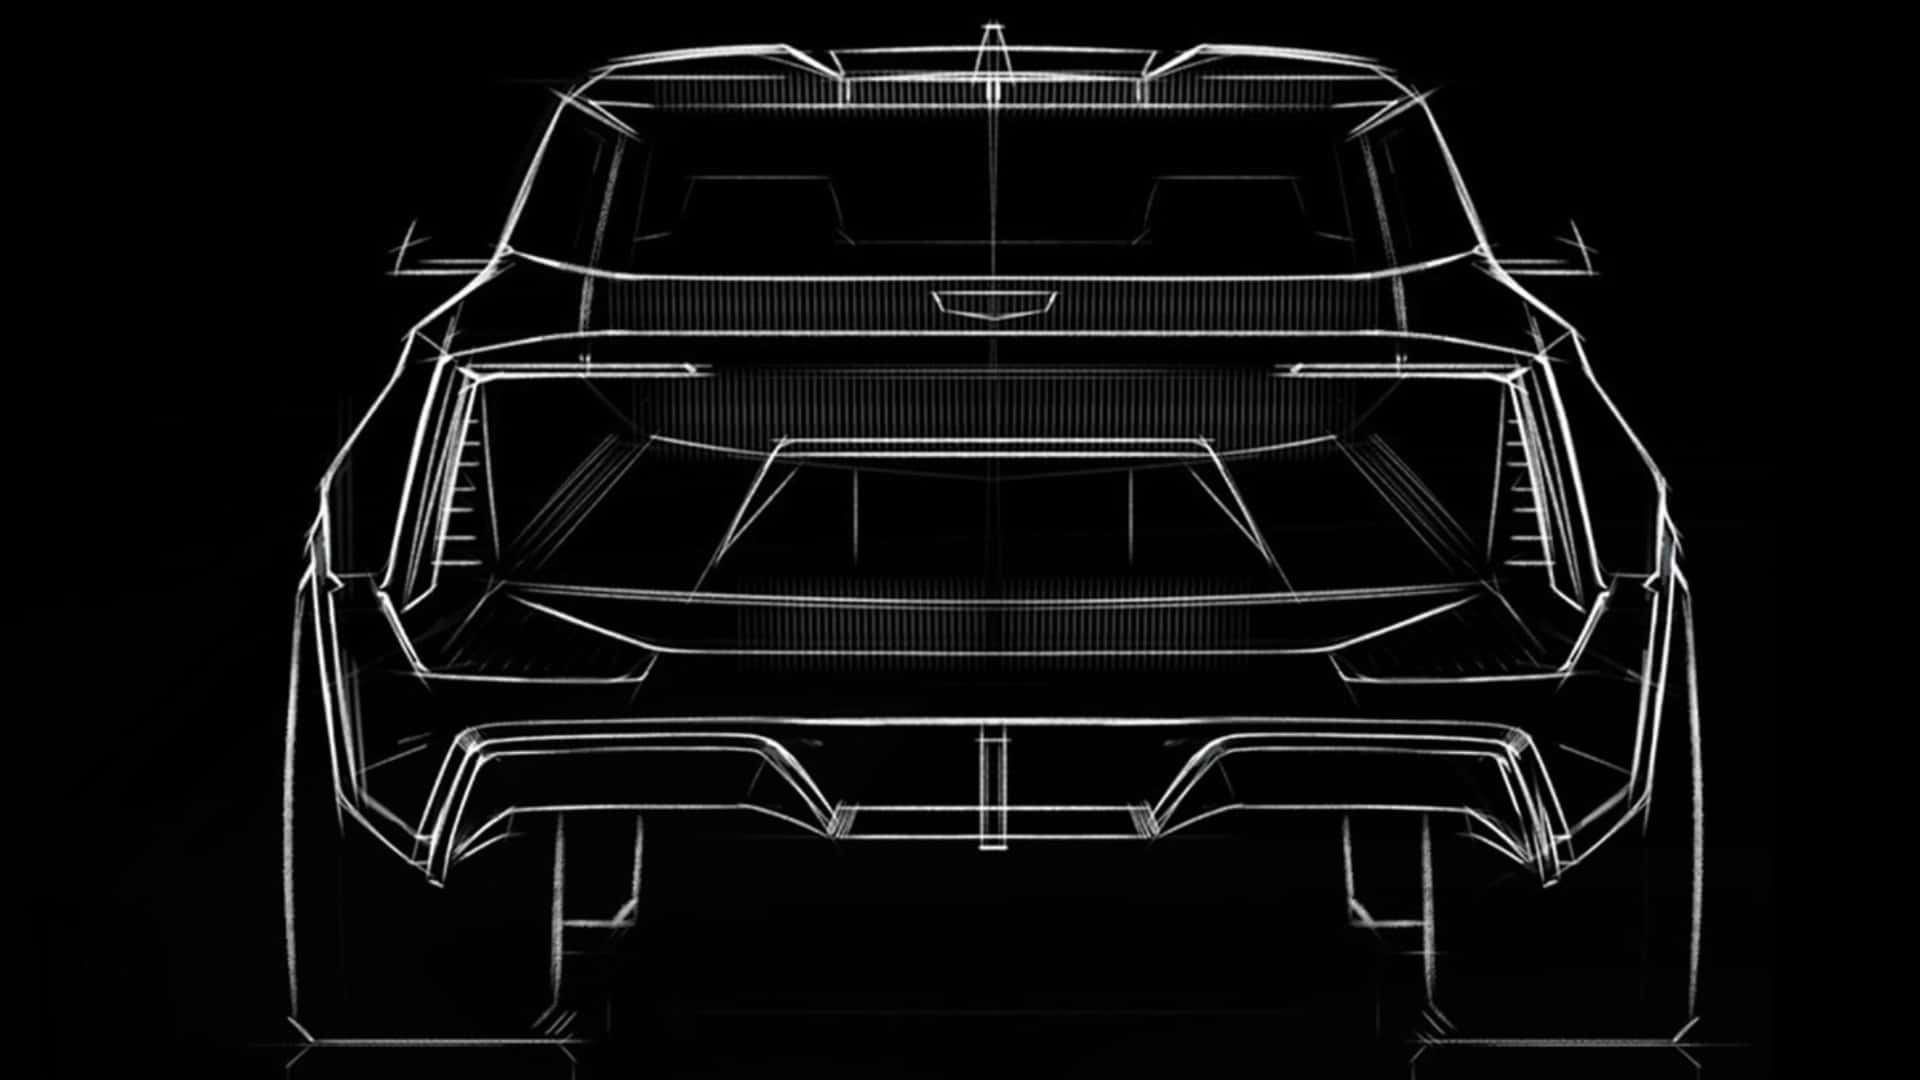 gm releases cadillac escalade iq design sketches, execution seems on point